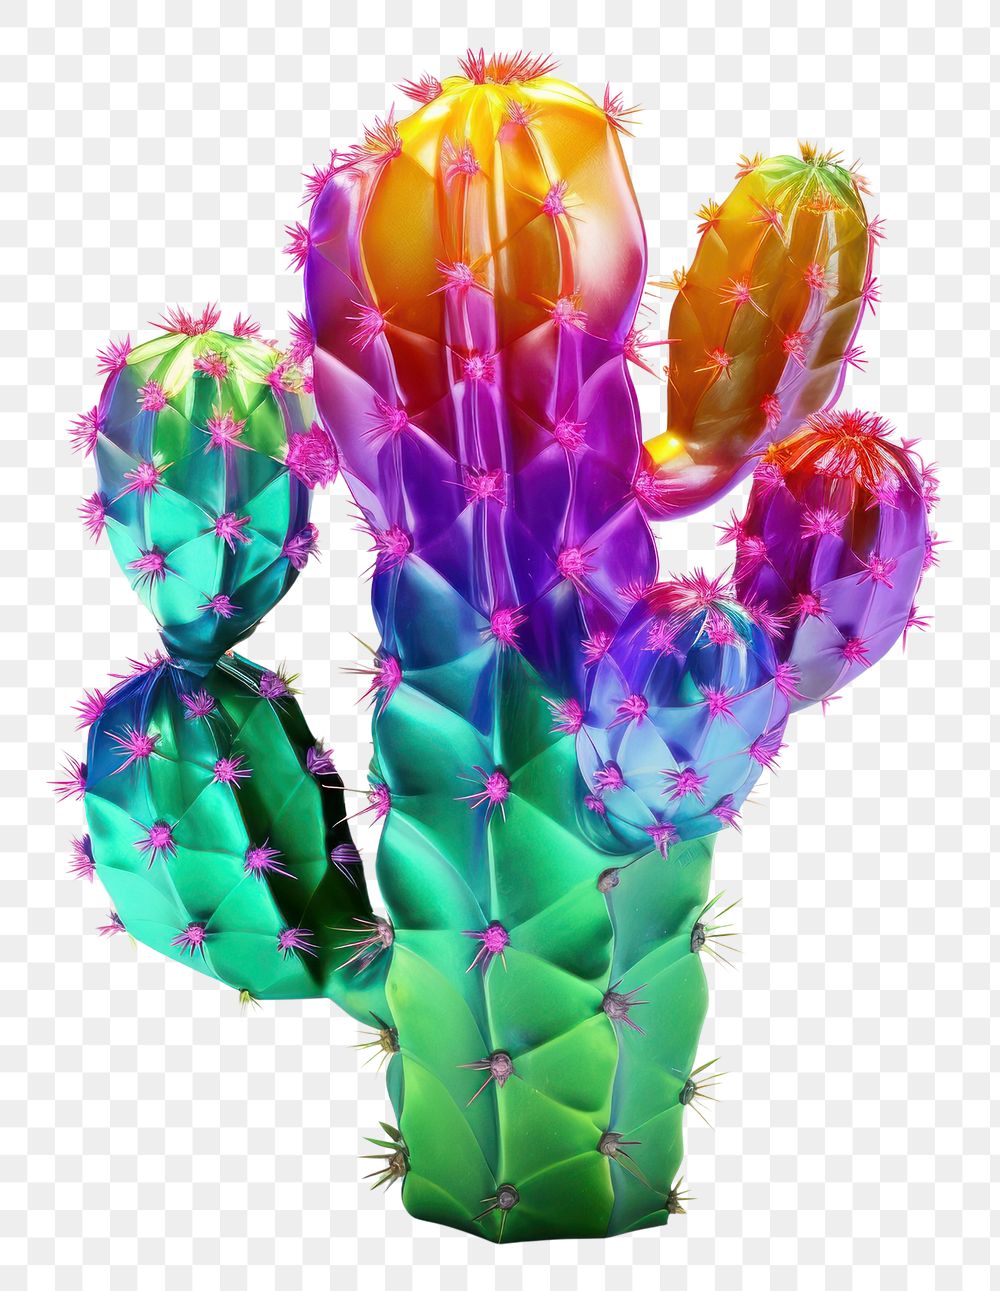 PNG Opuntia cactus plant white background creativity.